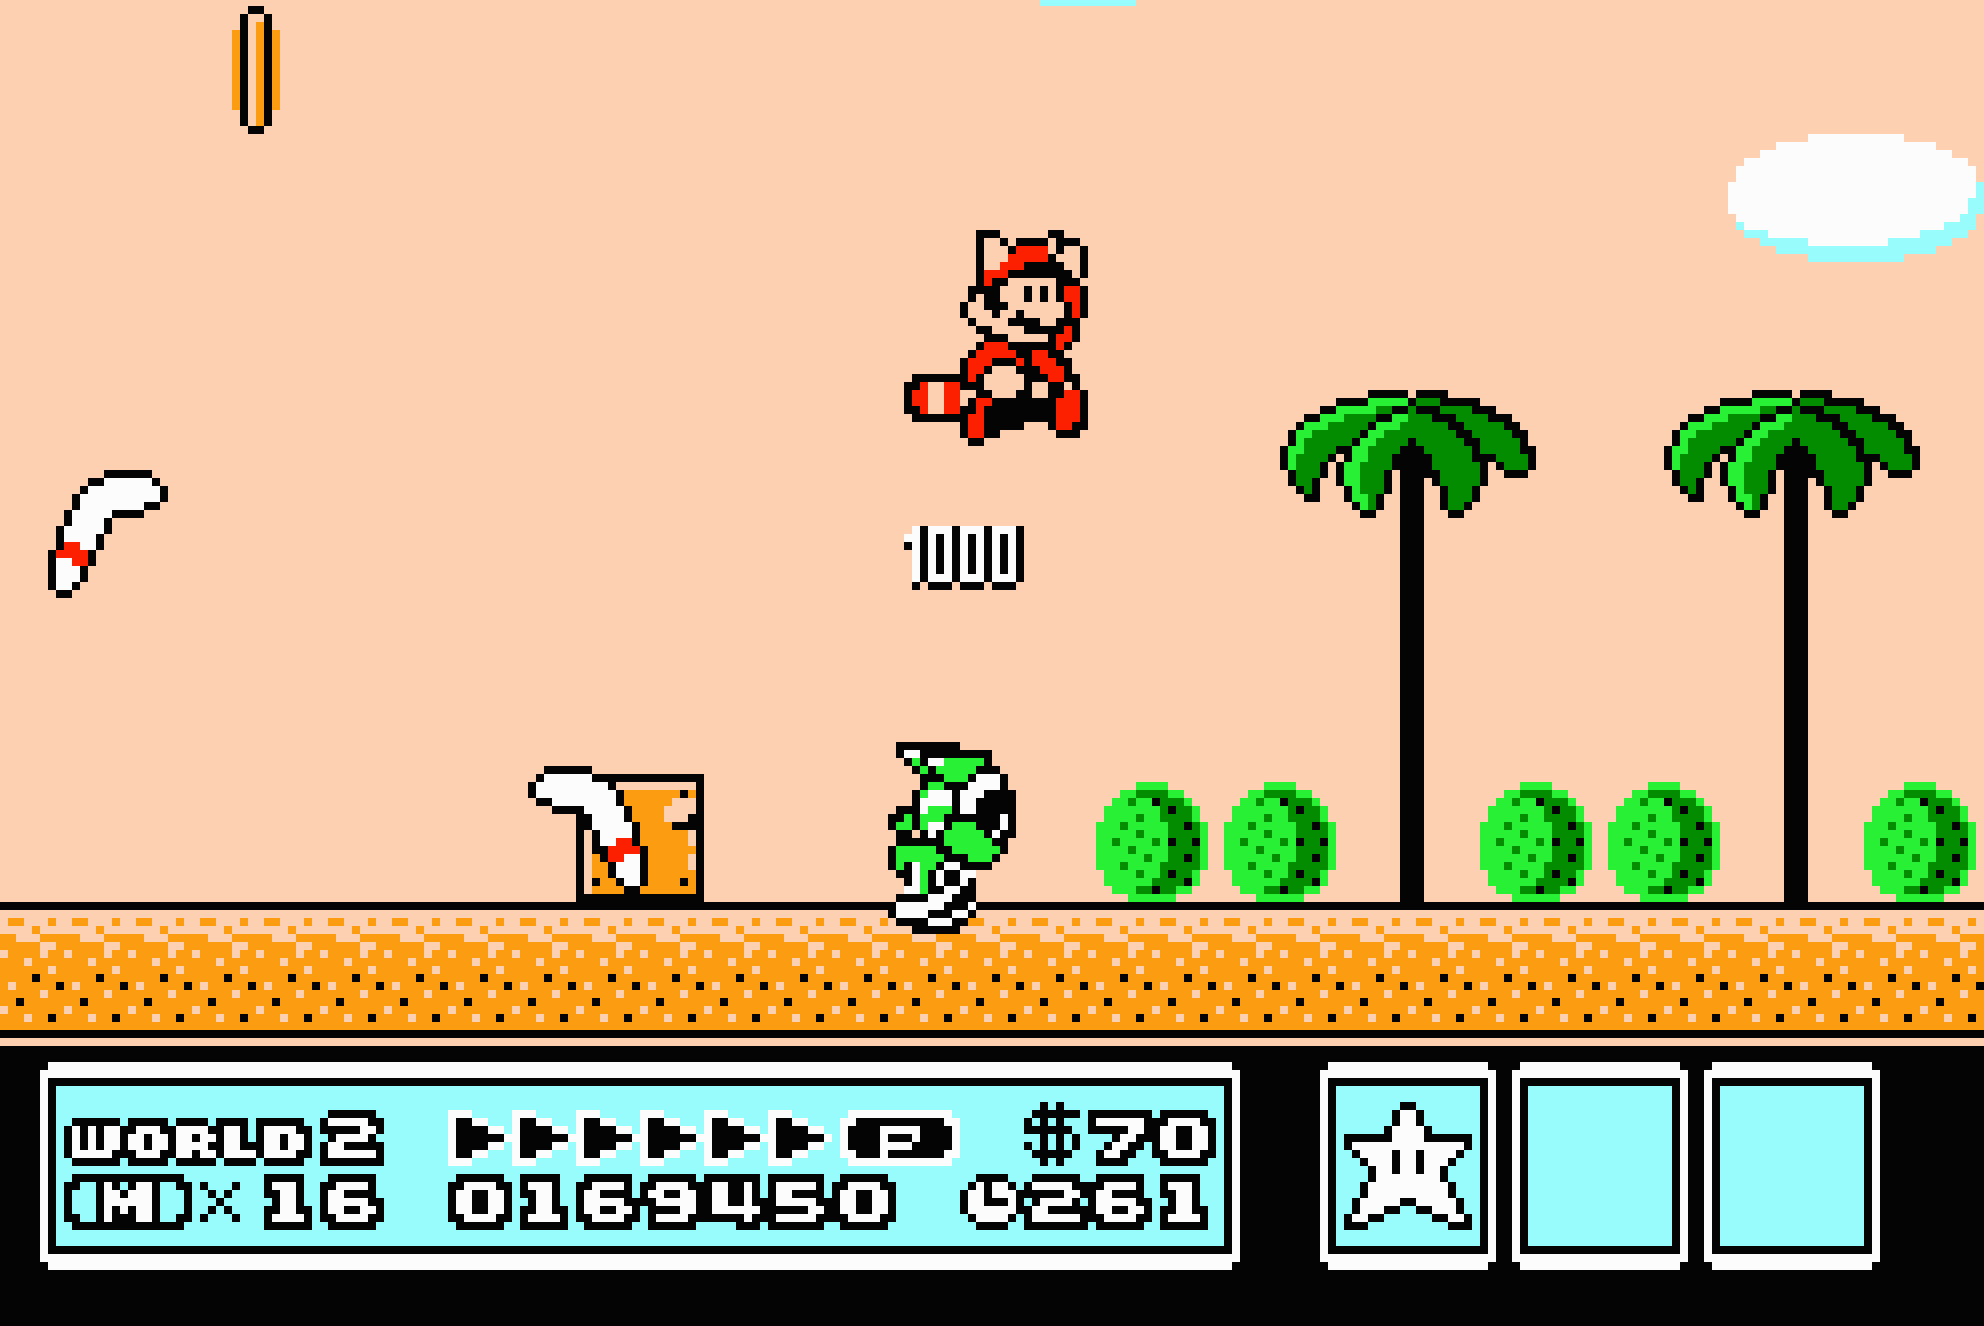 play new super mario bros 3 free online games